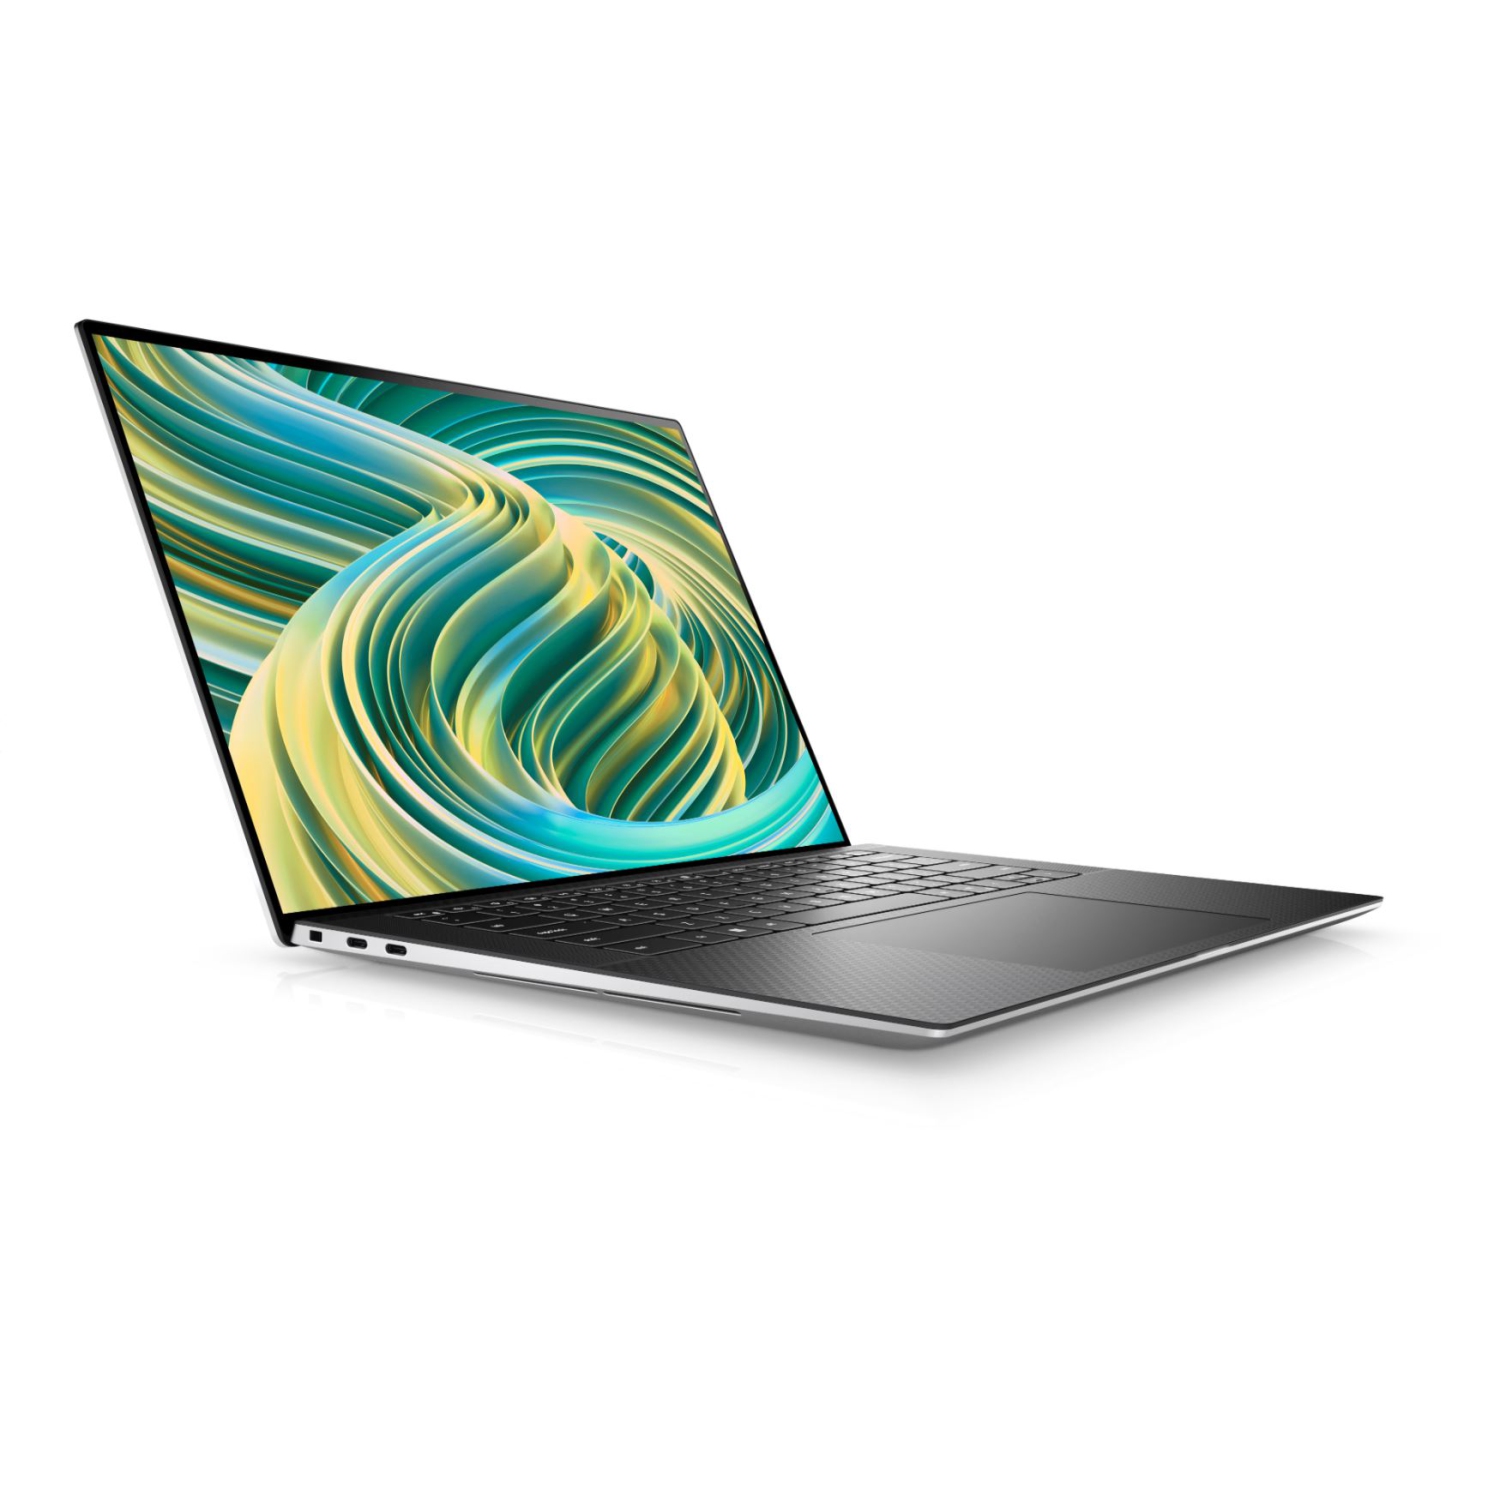 Refurbished (Excellent) Dell XPS 15 9530, 15" QHD Touch, Nvidia RTX 4060, i9-13900H, 32GB RAM, 1TB SSD, WIN 11 HOME